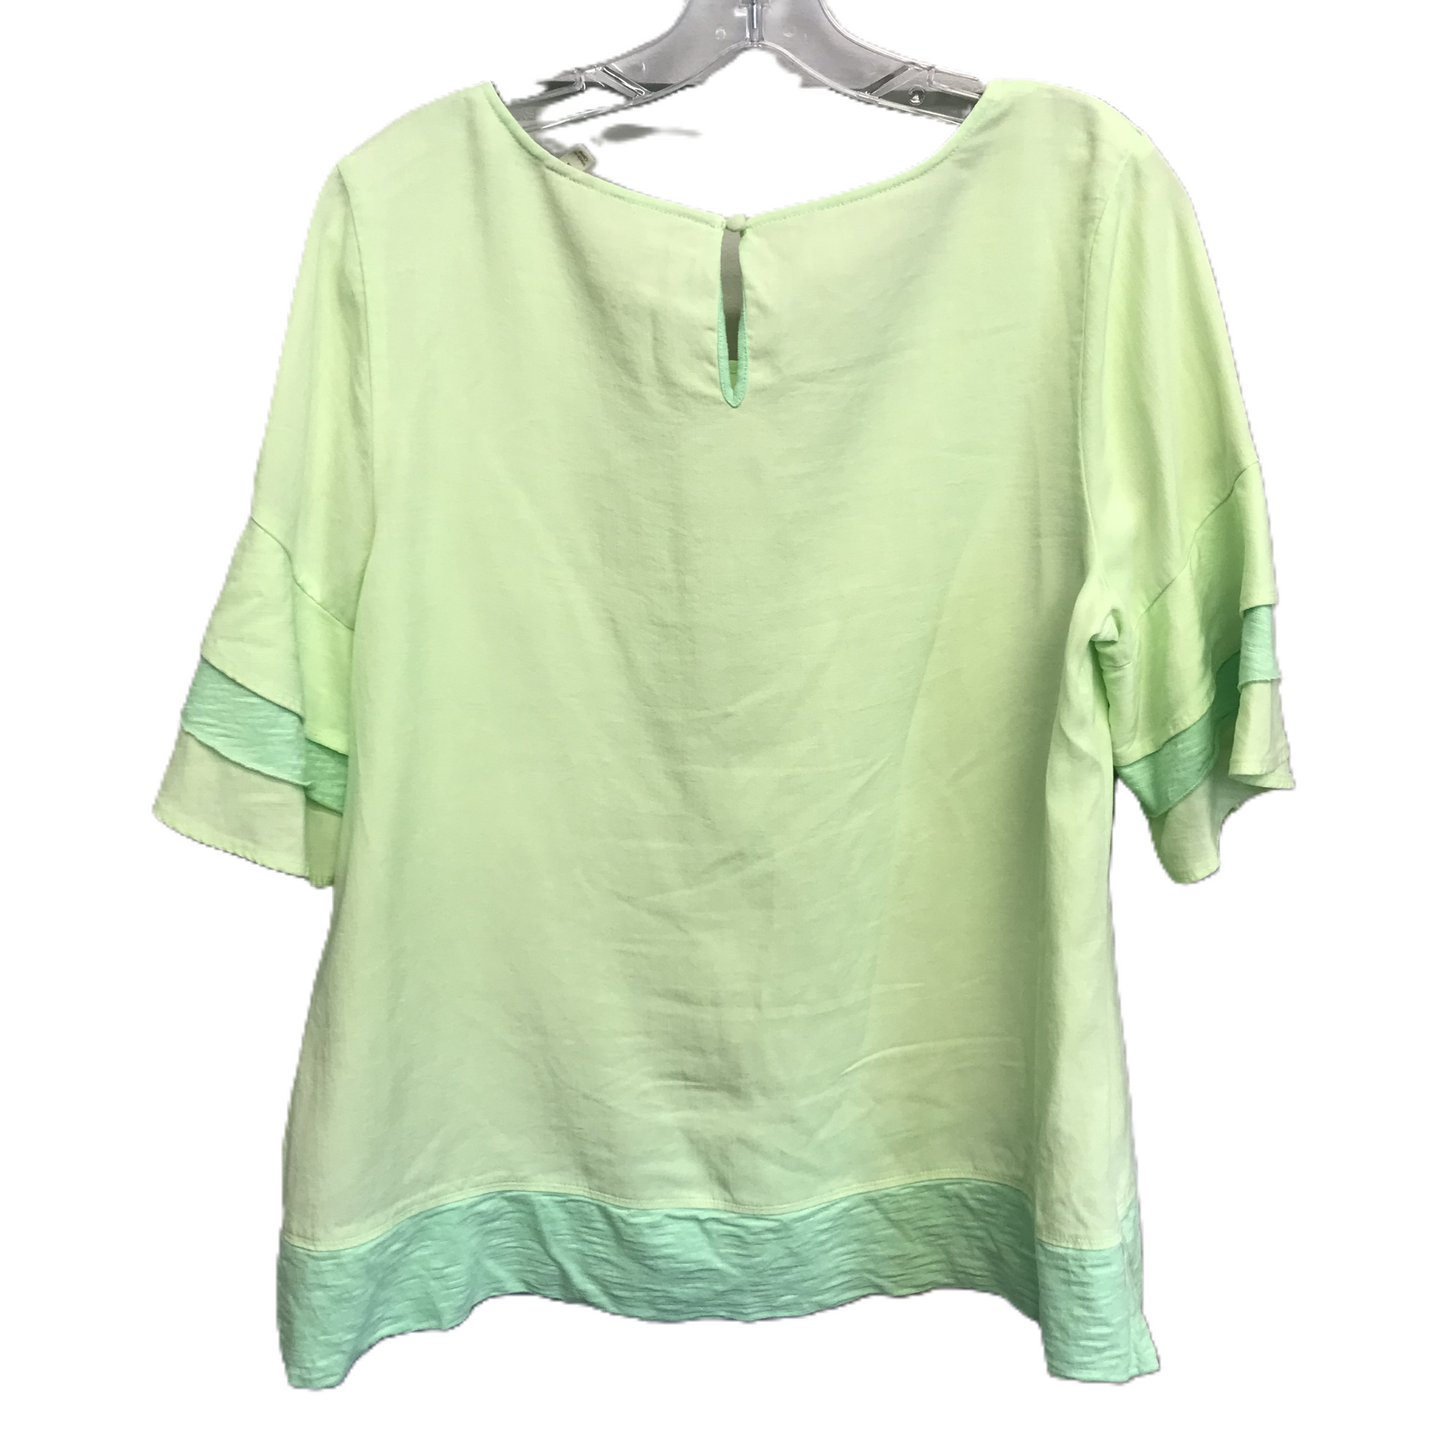 Green Top Short Sleeve By Soft Surroundings, Size: M